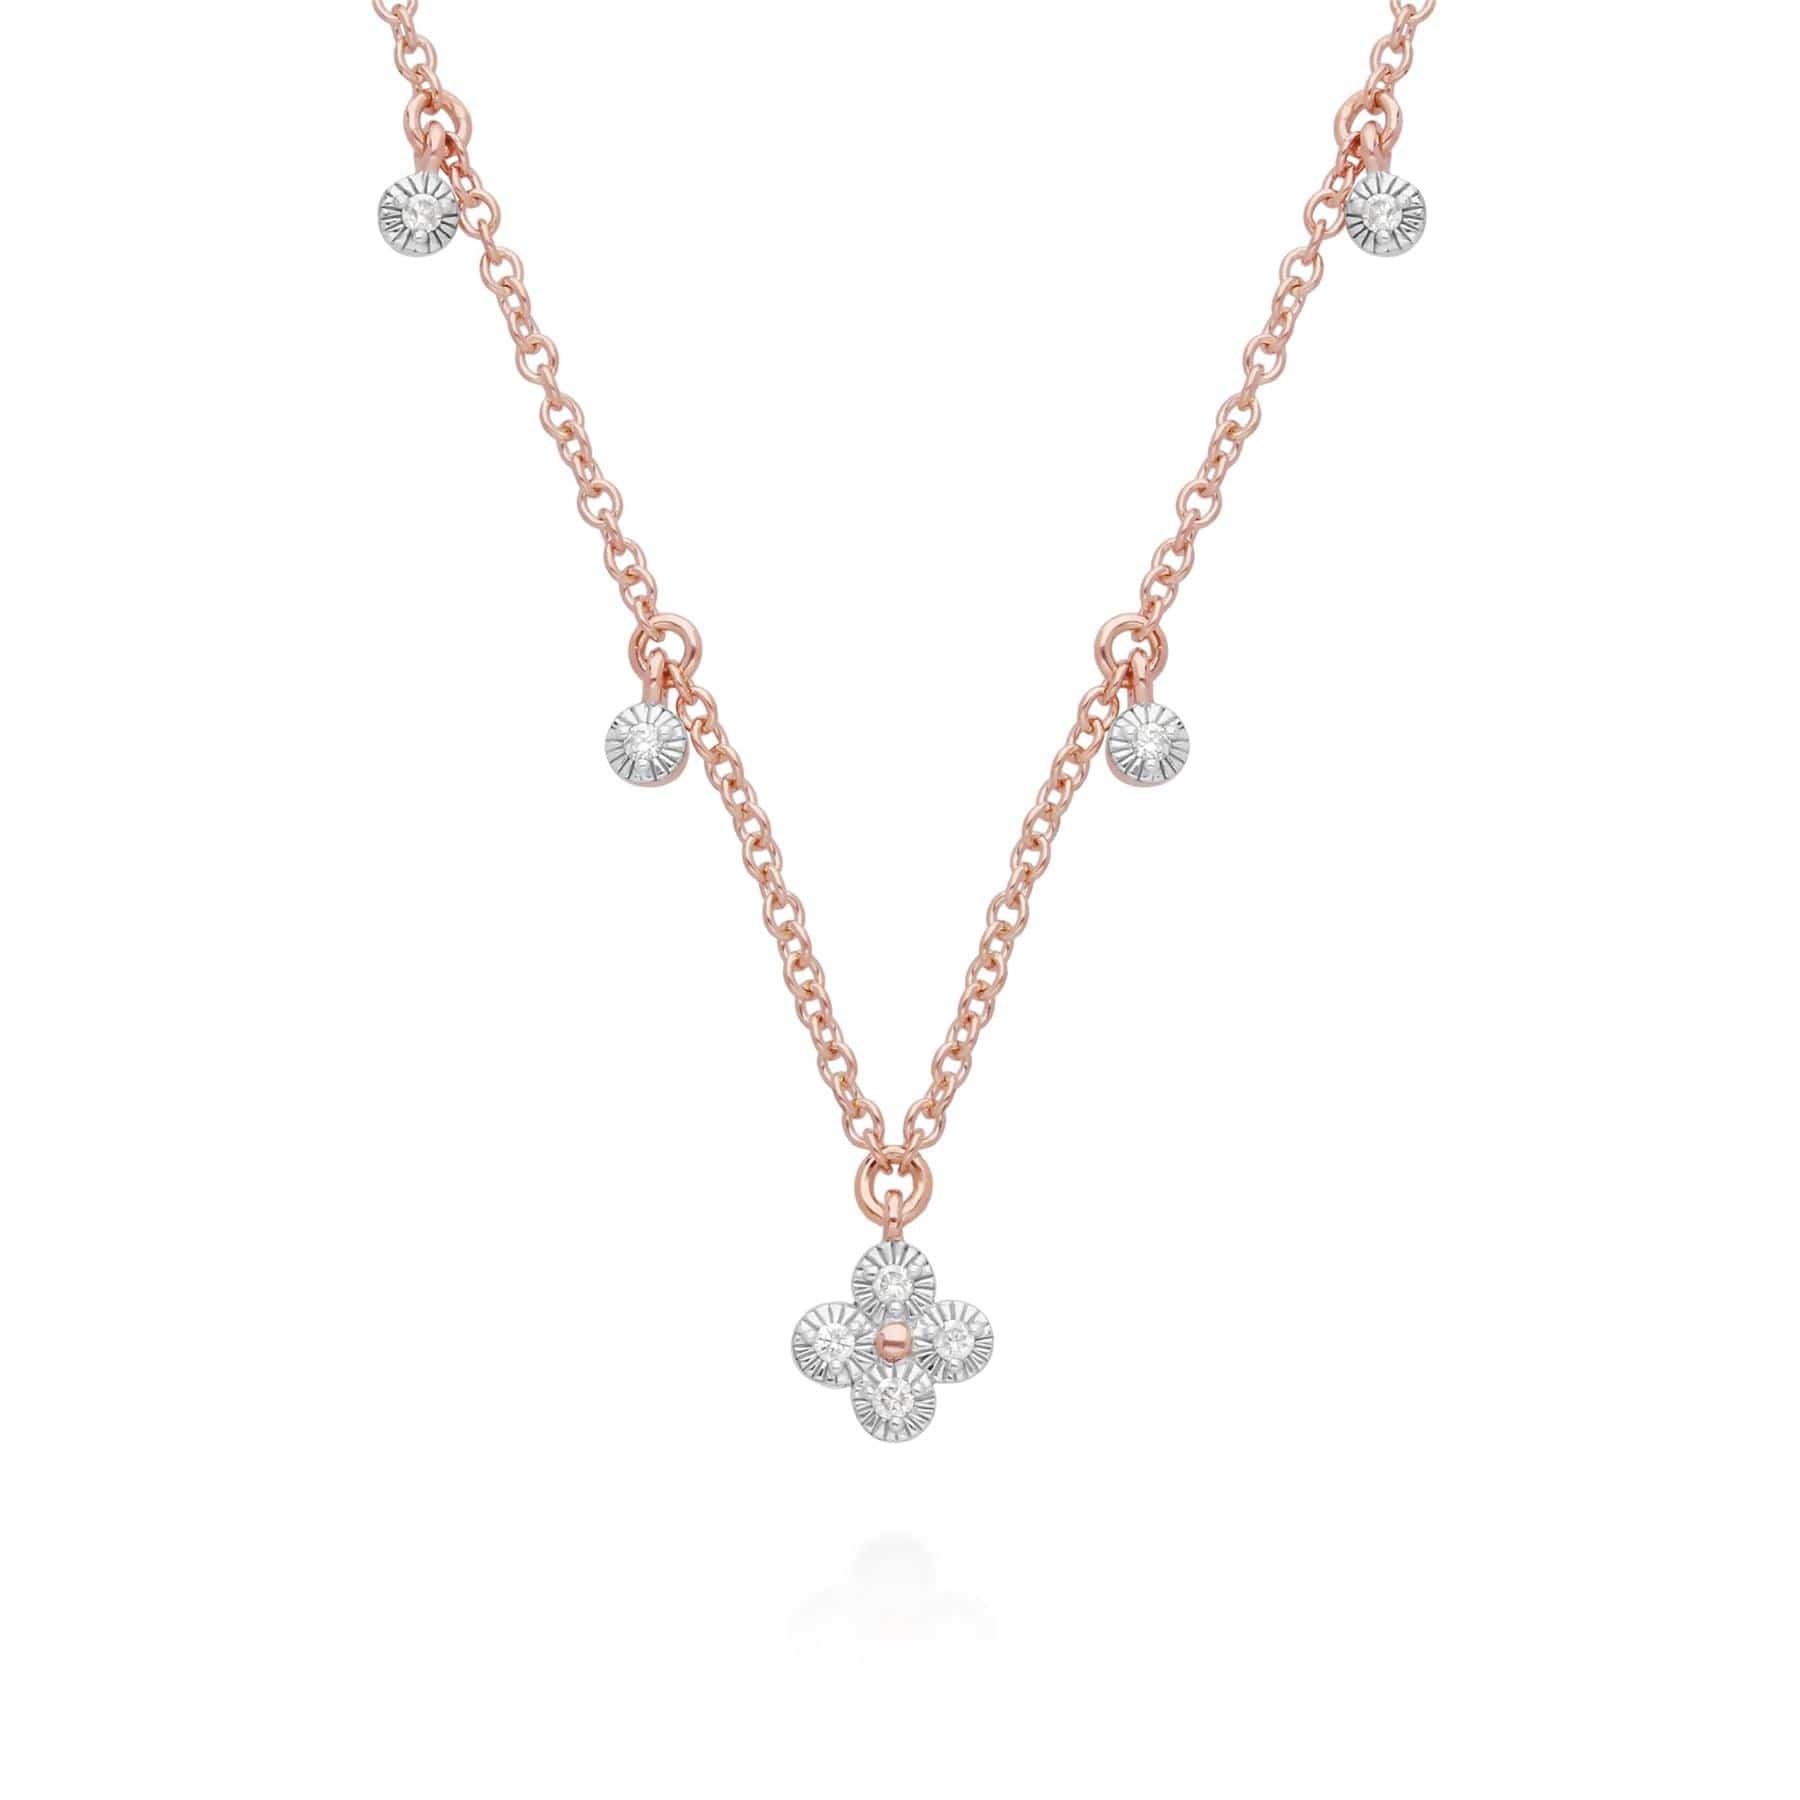 191N0233019 Diamond Flowers Choker Charm Necklace in 9ct Rose Gold 1